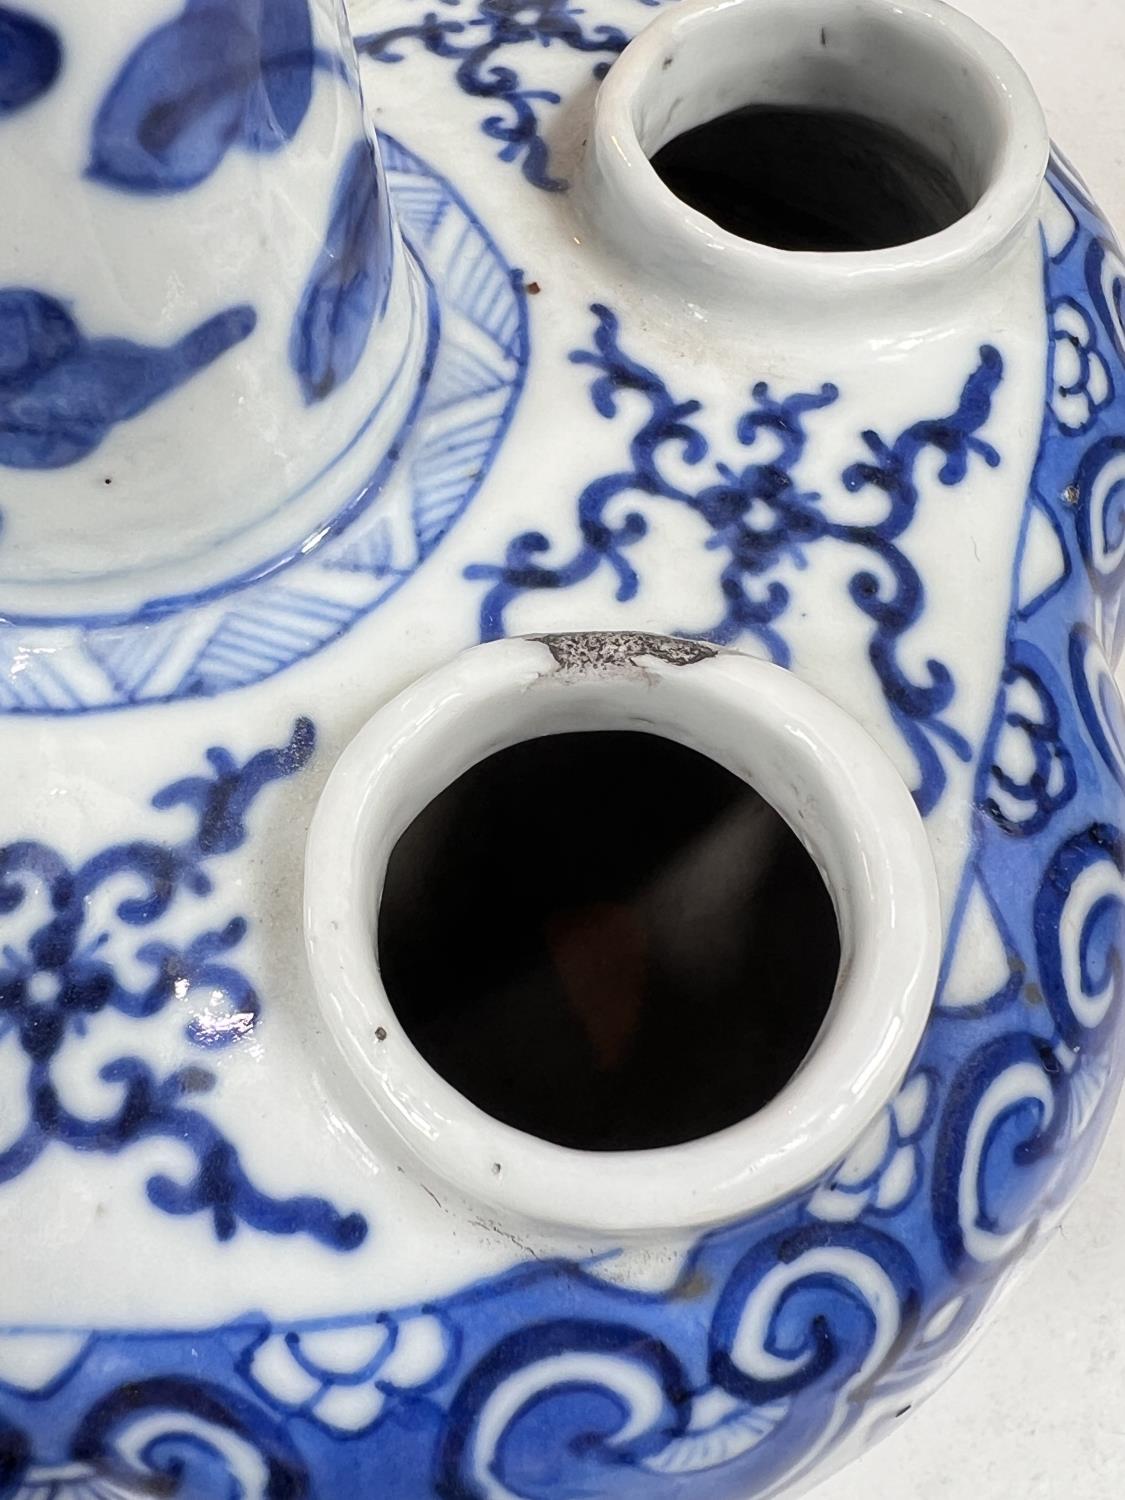 A pair of 19th century Chinese tulip or crocus vases blue and white decoration, with tapering neck - Image 5 of 8